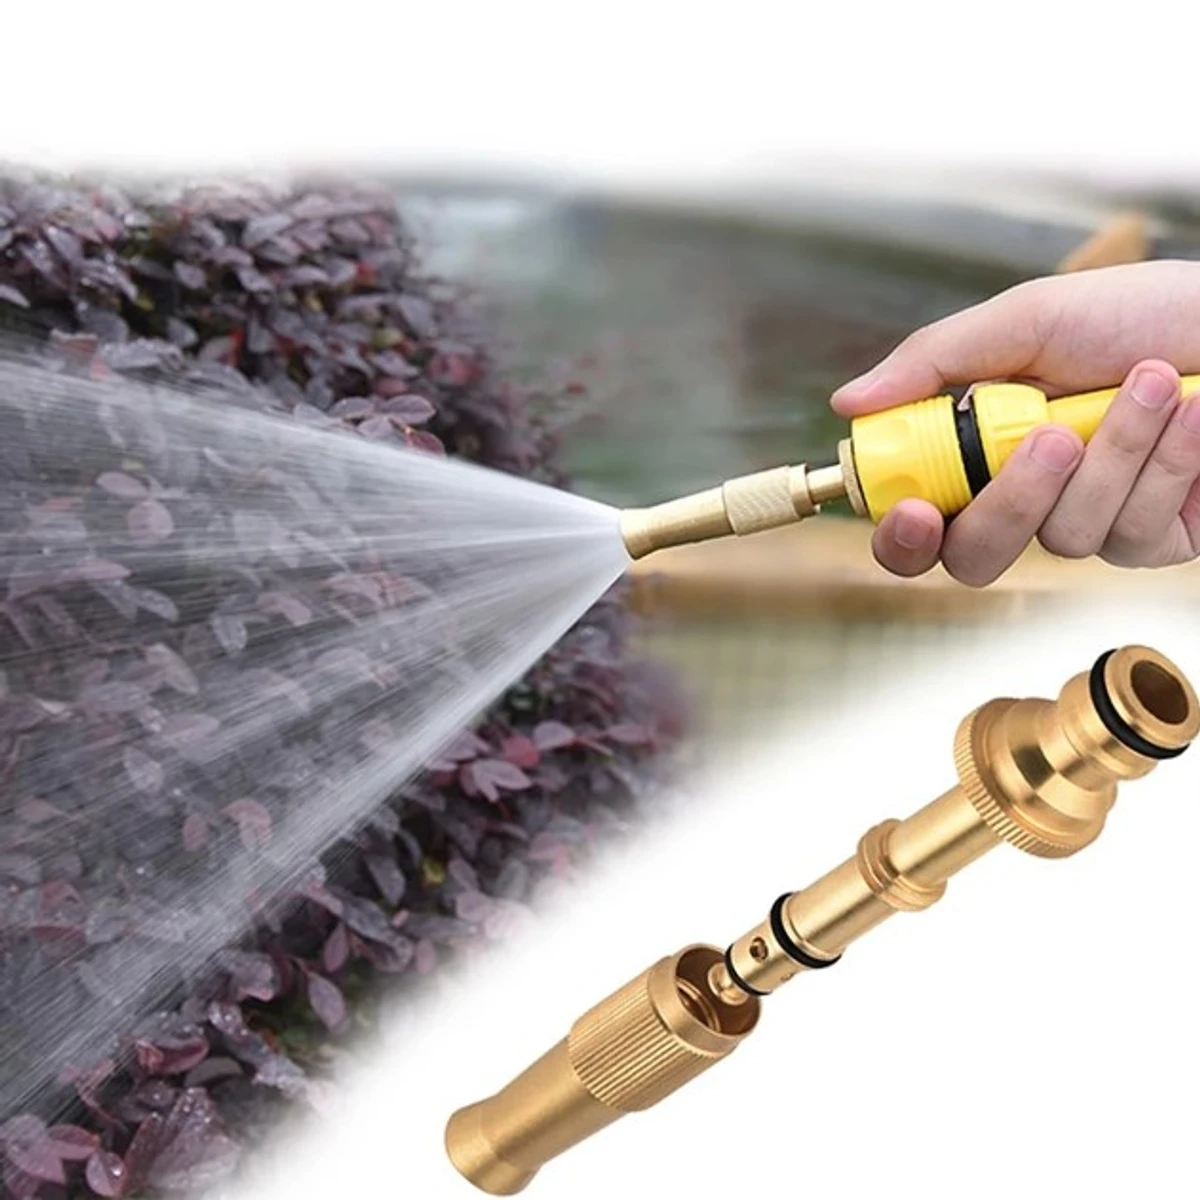 High Pressure Water Nozzle Household Pure Copper Direct Spray Gun Flower Watering Tool Adjustable Pressure Washer